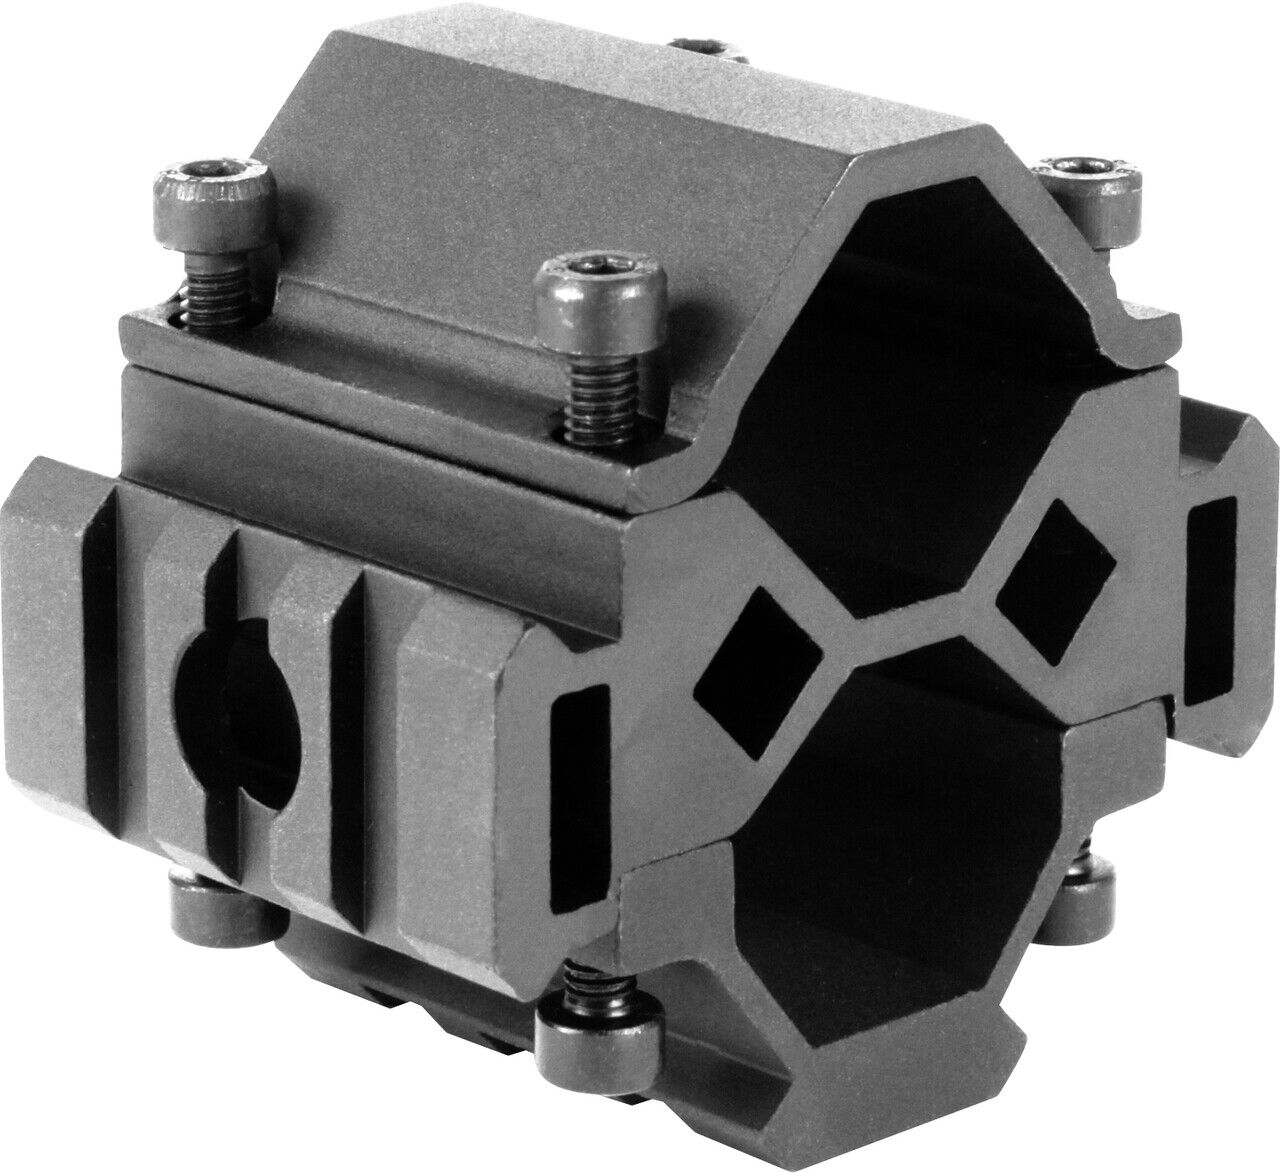 Tactical Magazine Tube Mount Compatible With Remington 870 12 Gauge Pumps. - TRINITY SUPPLY INC